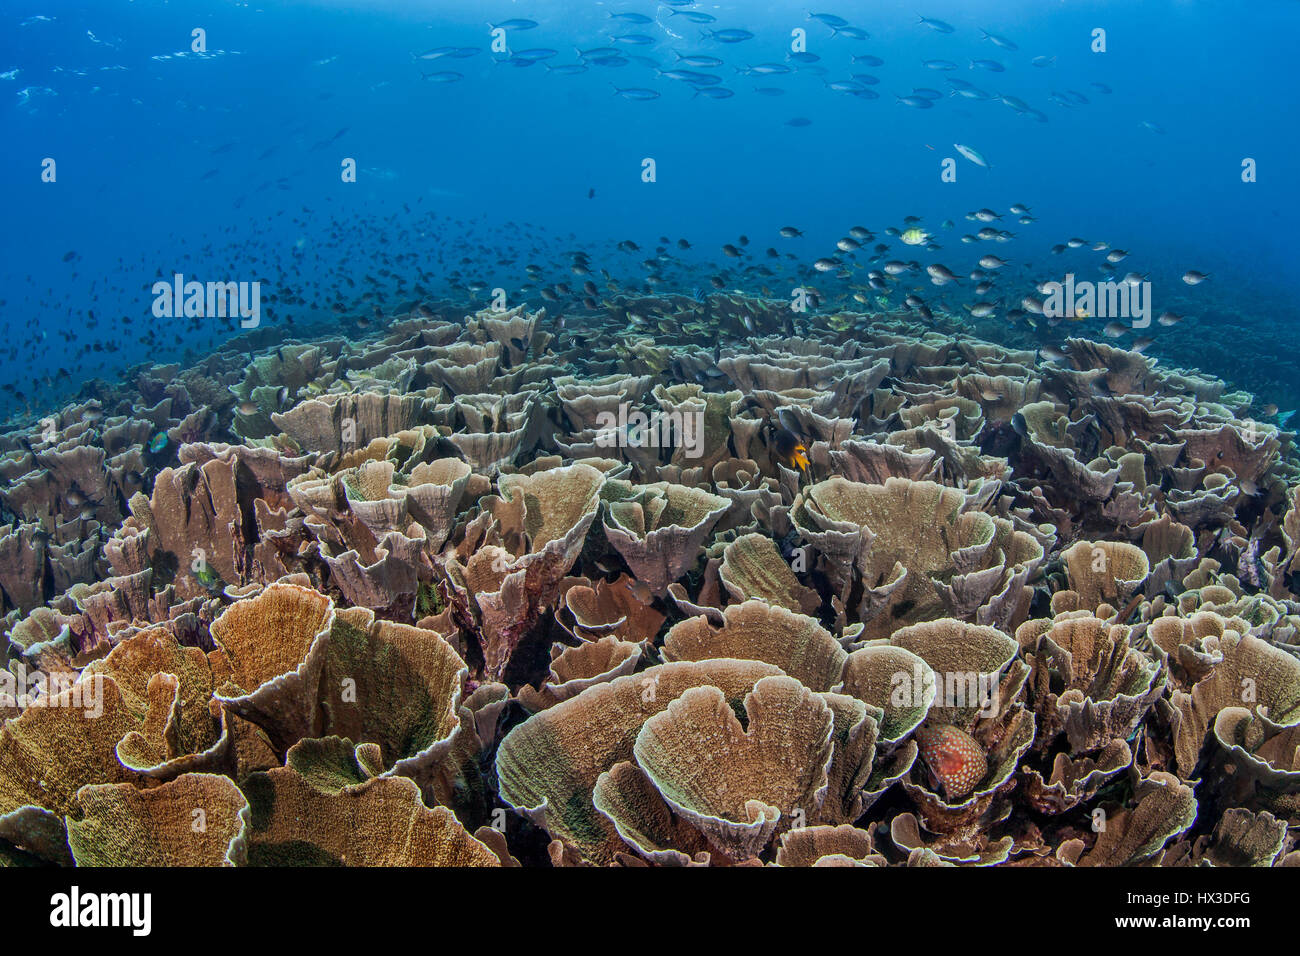 Close-focus, wide-angle panoramic view of a cabbage coral (Turbinaria sp.) reef. Raja Ampat, Indonesia. Stock Photo